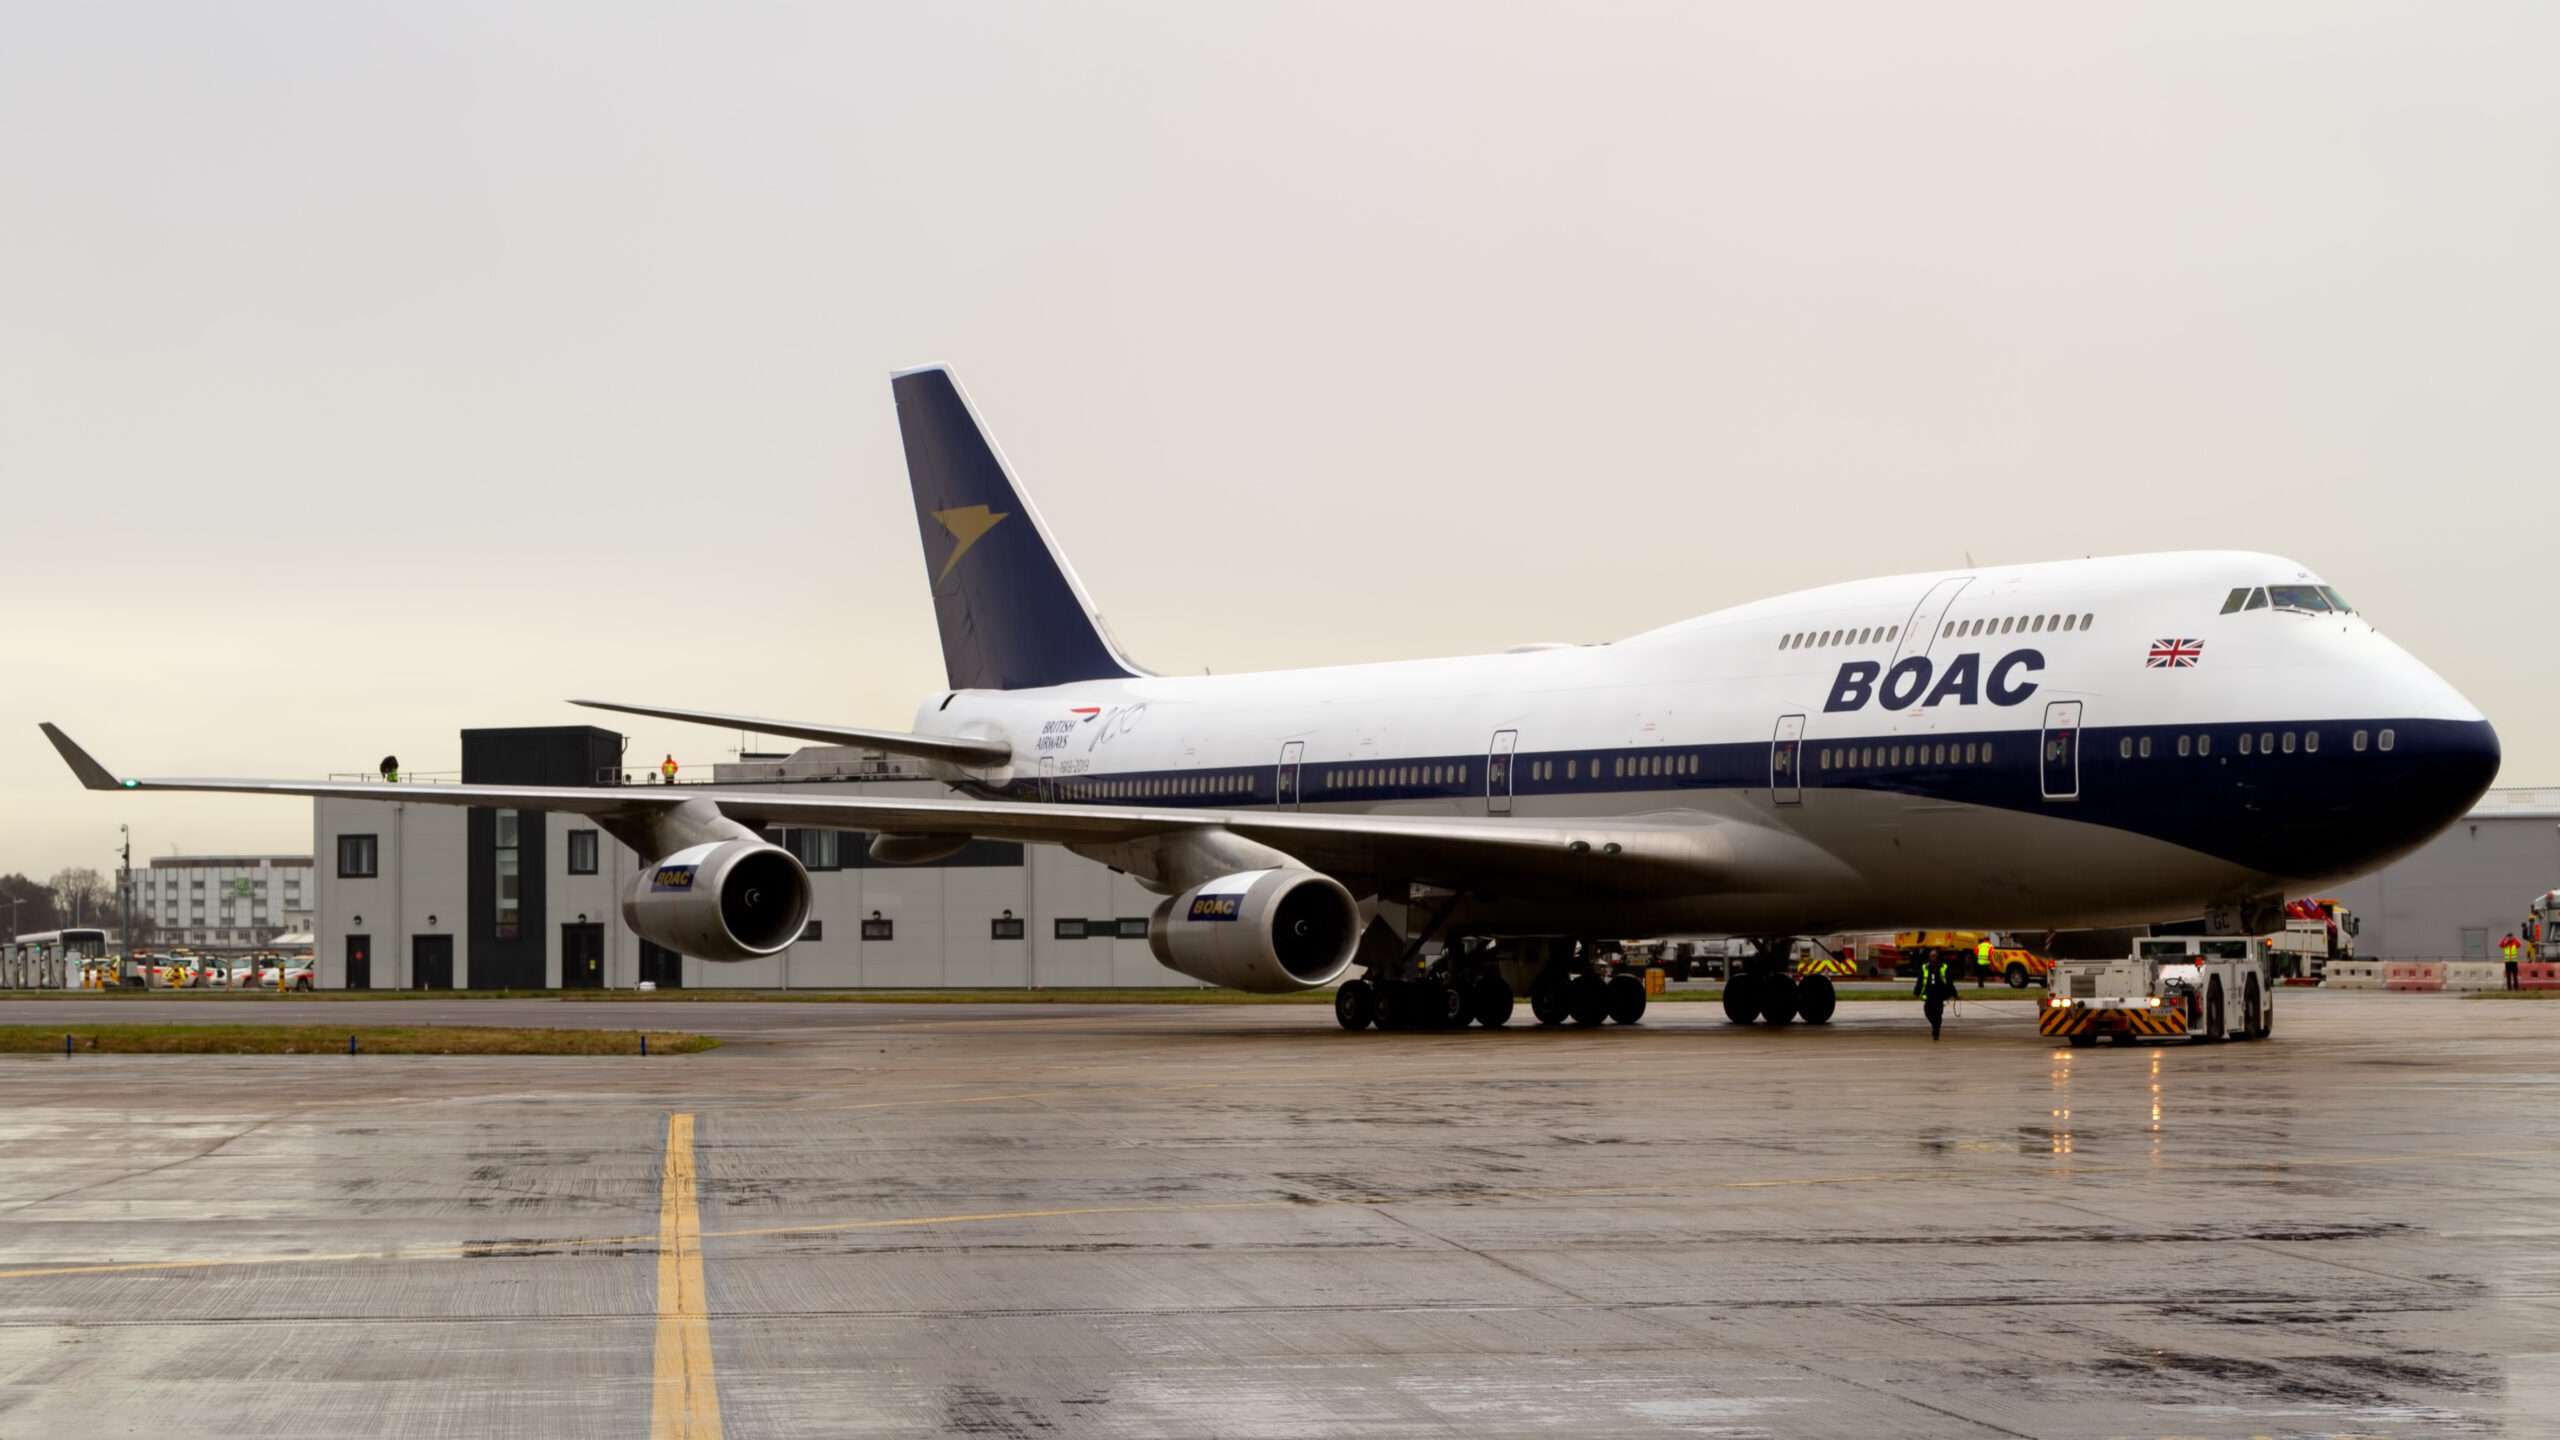 British Airways Boeing 747 BOAC Livery to Be Scrapped